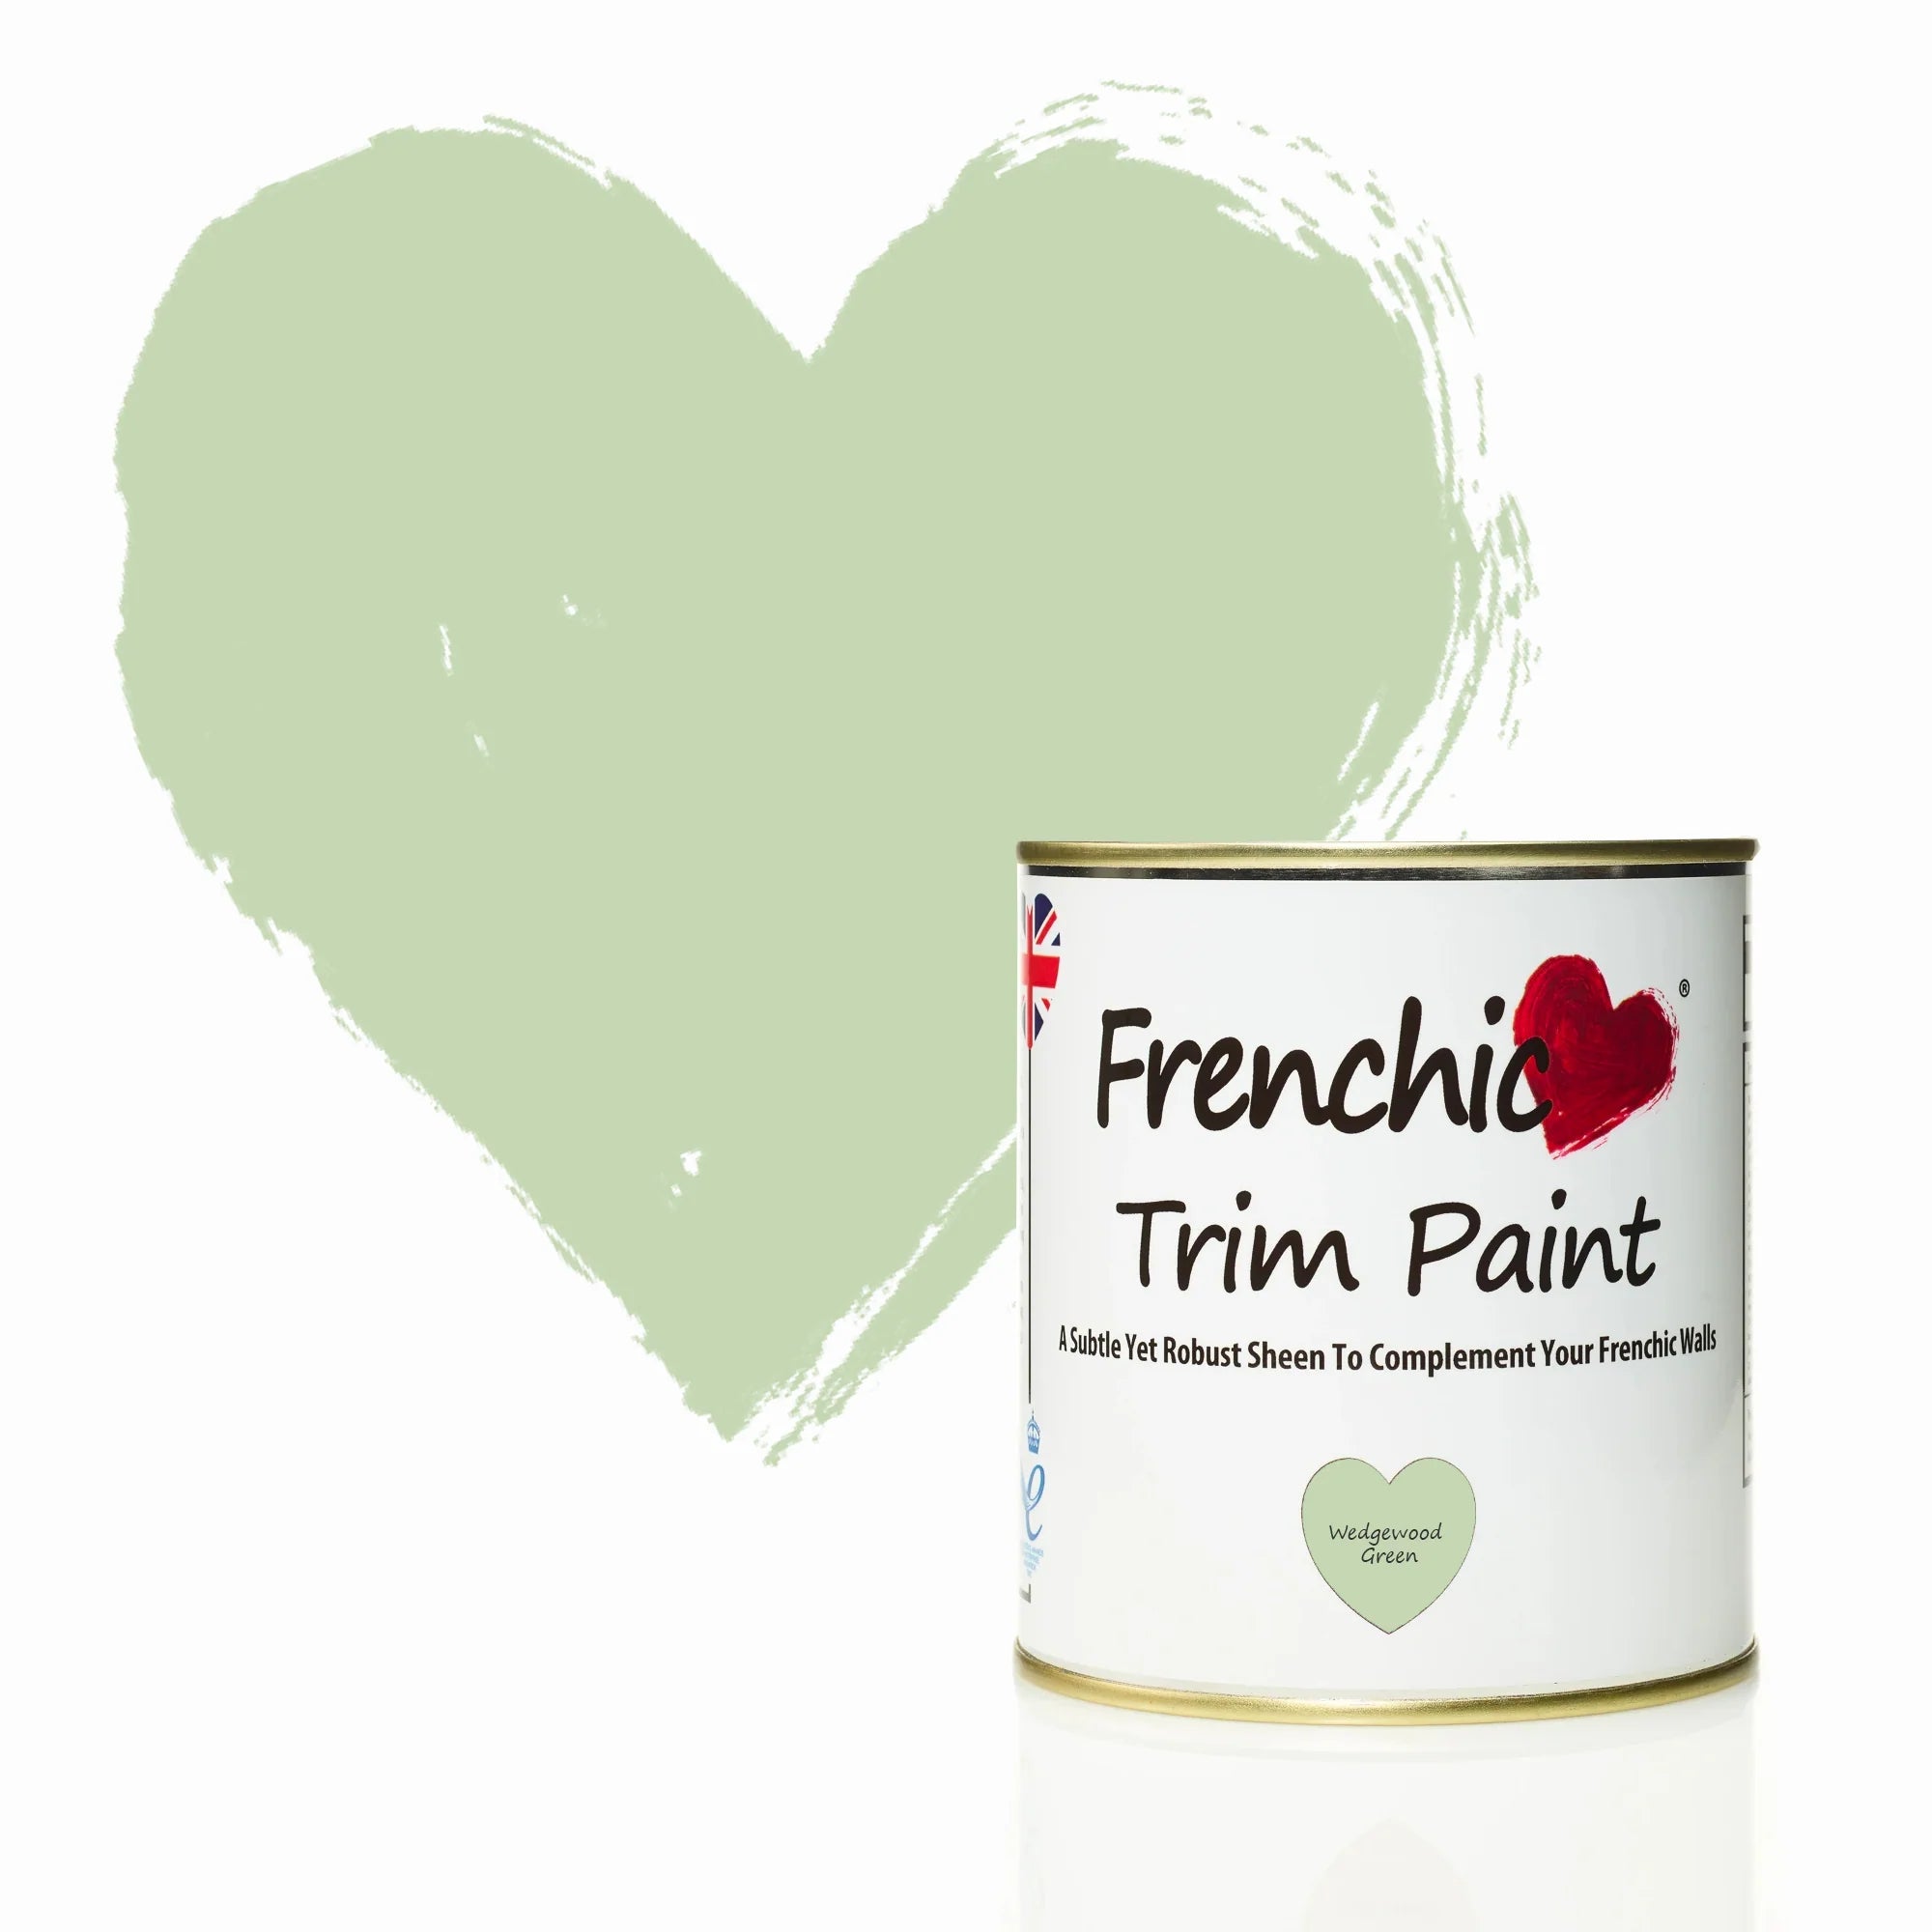 Frenchic Paint Wedgewood Green Trim Paint Frenchic Paint Trim Paint Range by Weirs of Baggot Street Irelands Largest and most Trusted Stockist of Frenchic Paint. Shop online for Nationwide and Same Day Dublin Delivery